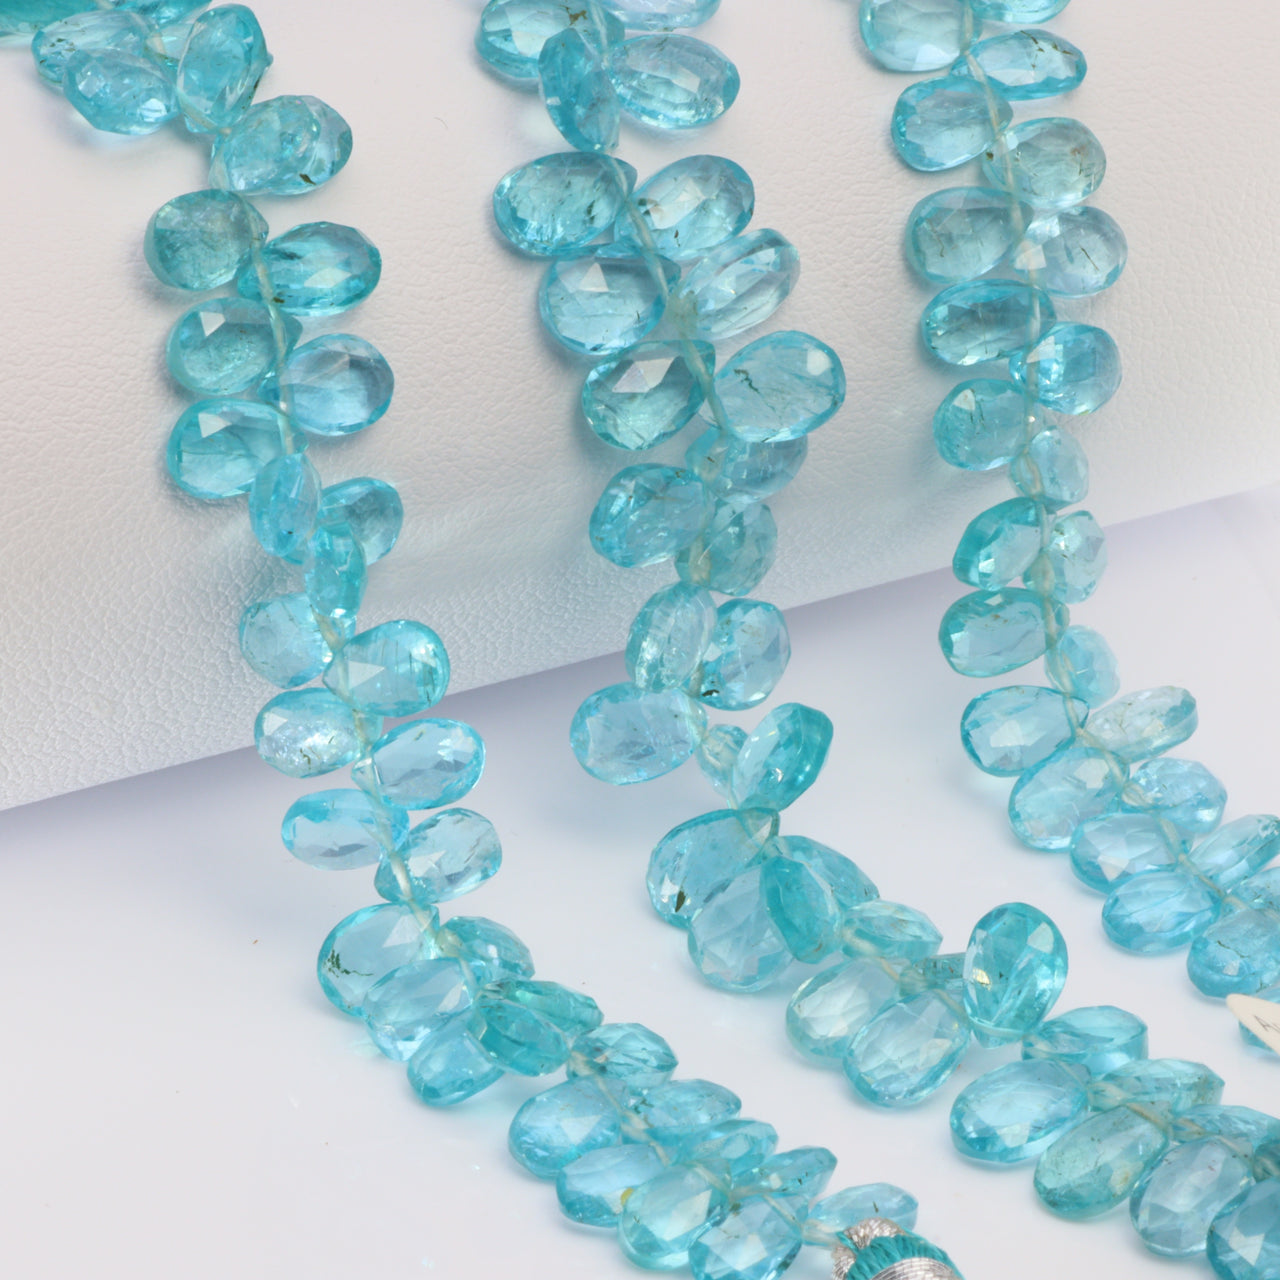 Sea Blue Apatite 7x5mm Faceted Pear Shaped Briolettes